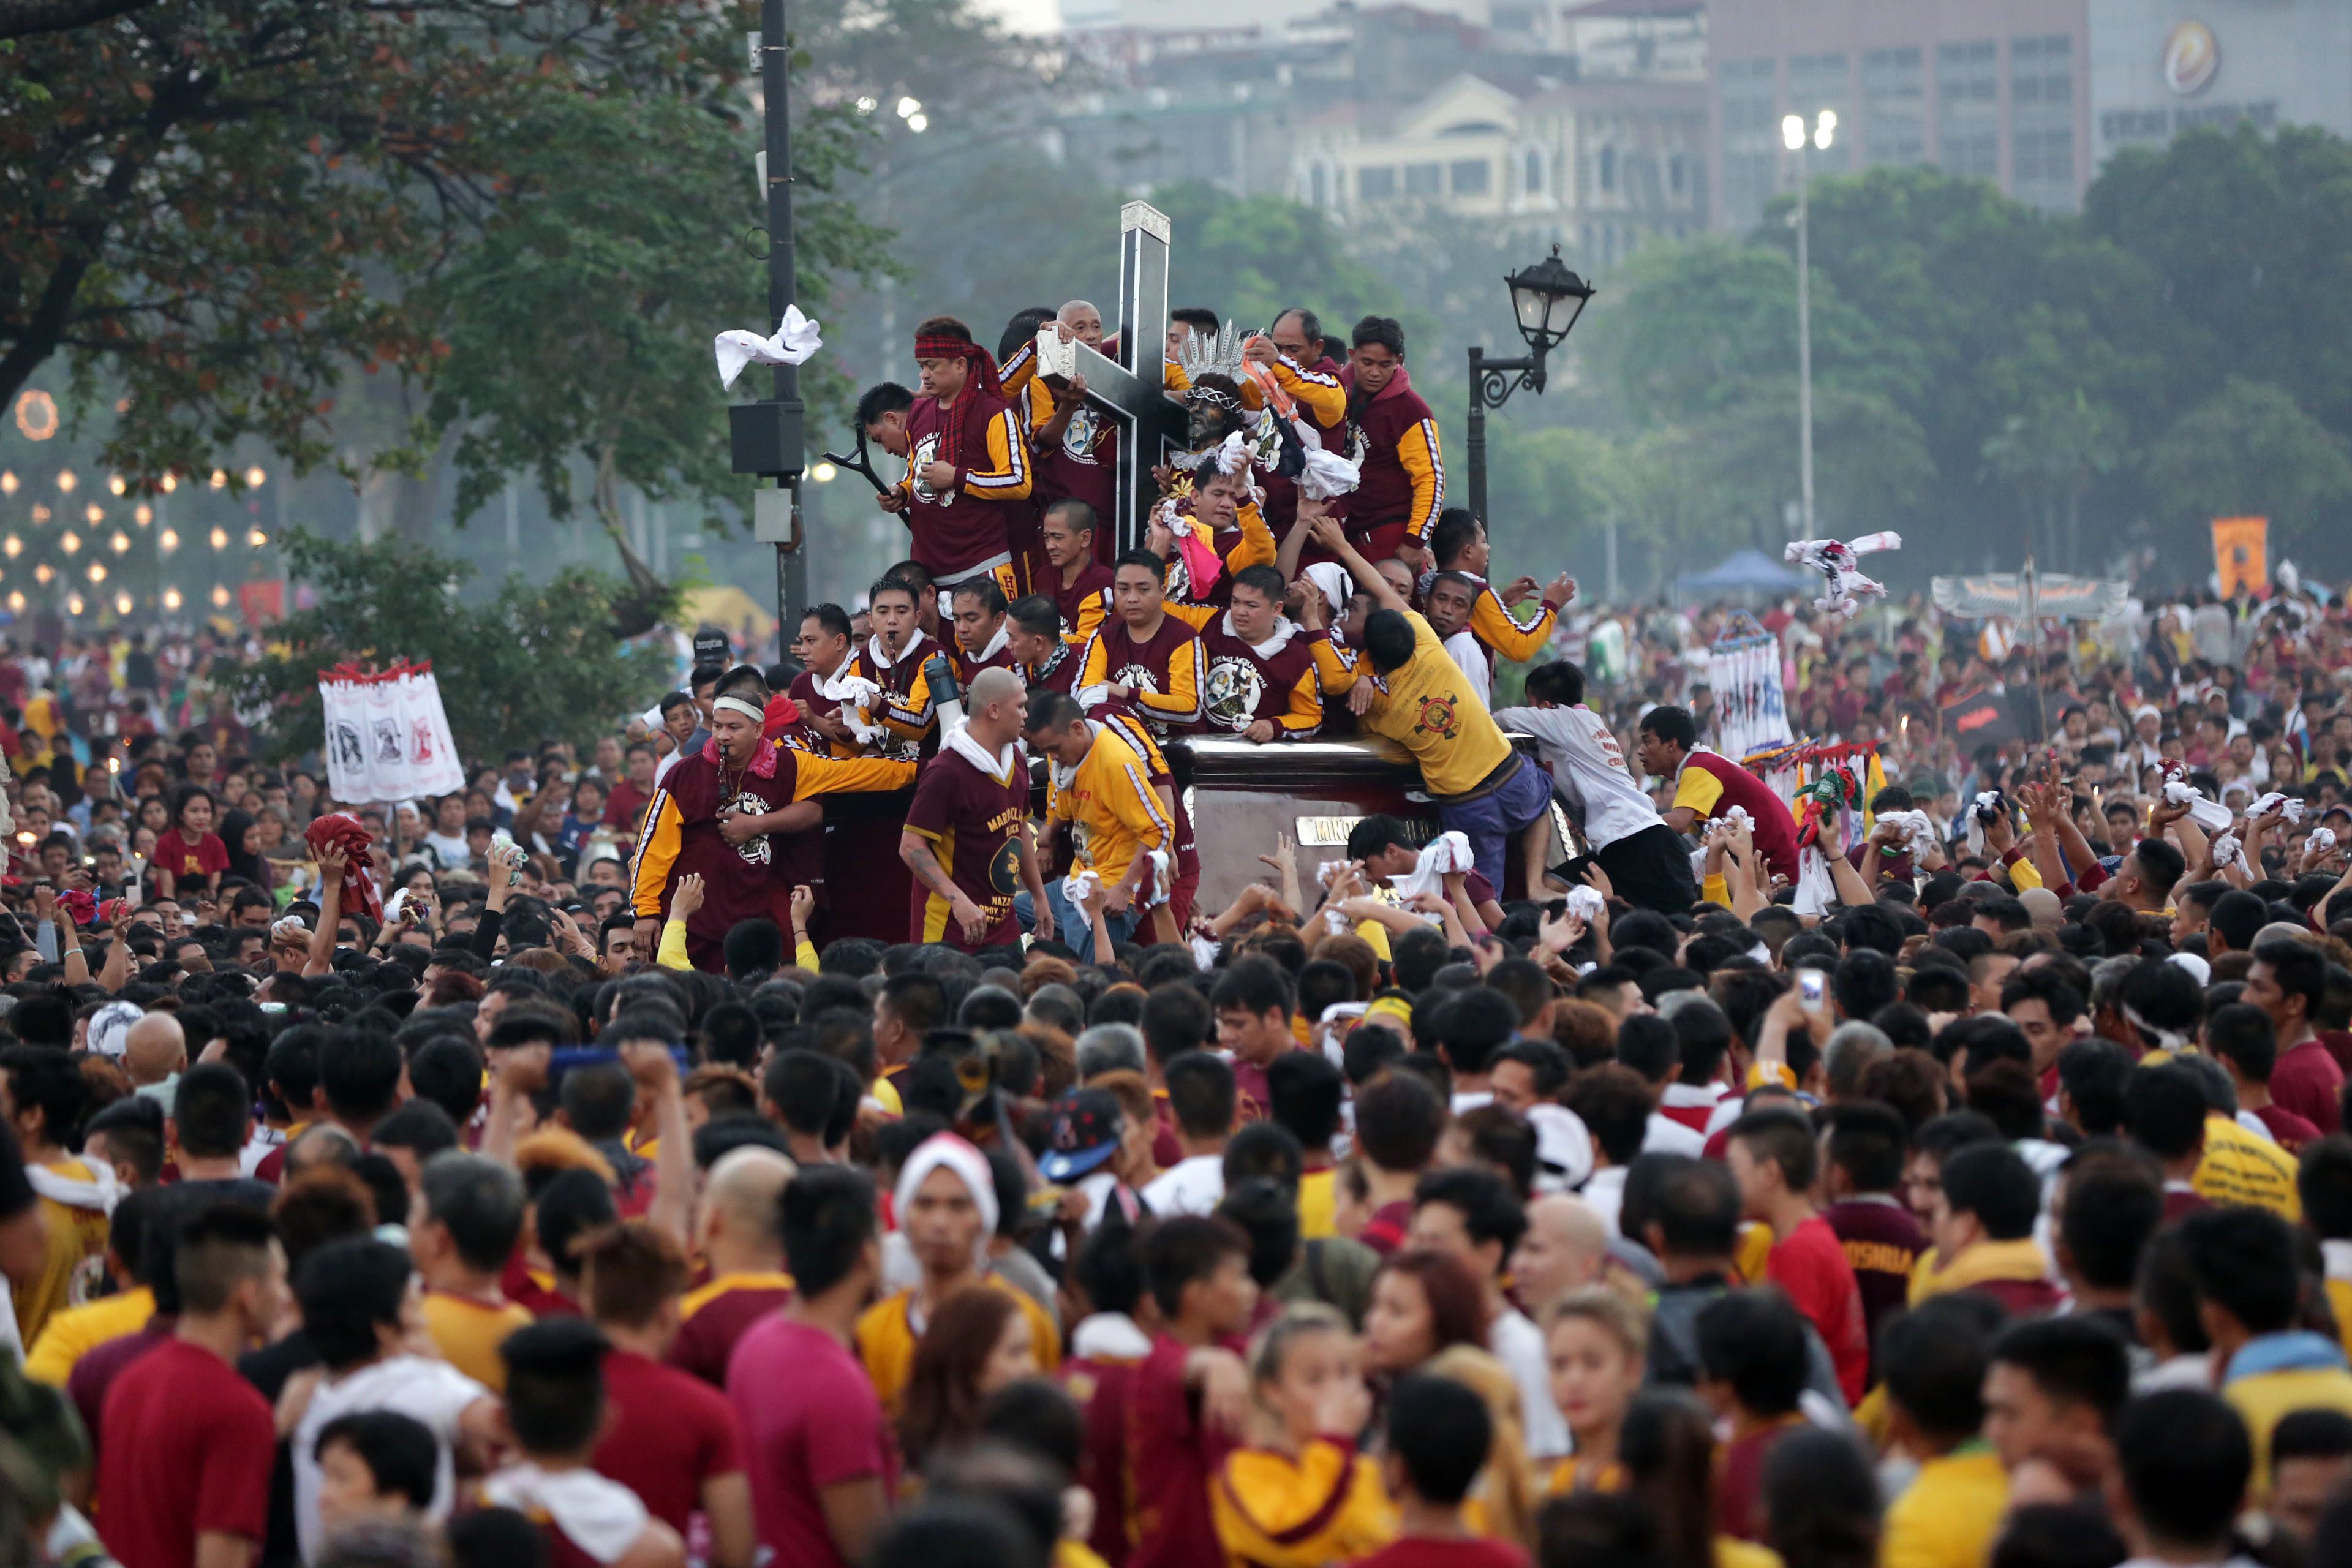 DEVOTION. Devotees try to get near the carriage carrying the image of Jesus of the Black Nazarene as the annual Traslacion starts at the Quirino Grandstand in Manila on Saturday, January 9, 2015. Photo by Ben Nabong/Rappler   